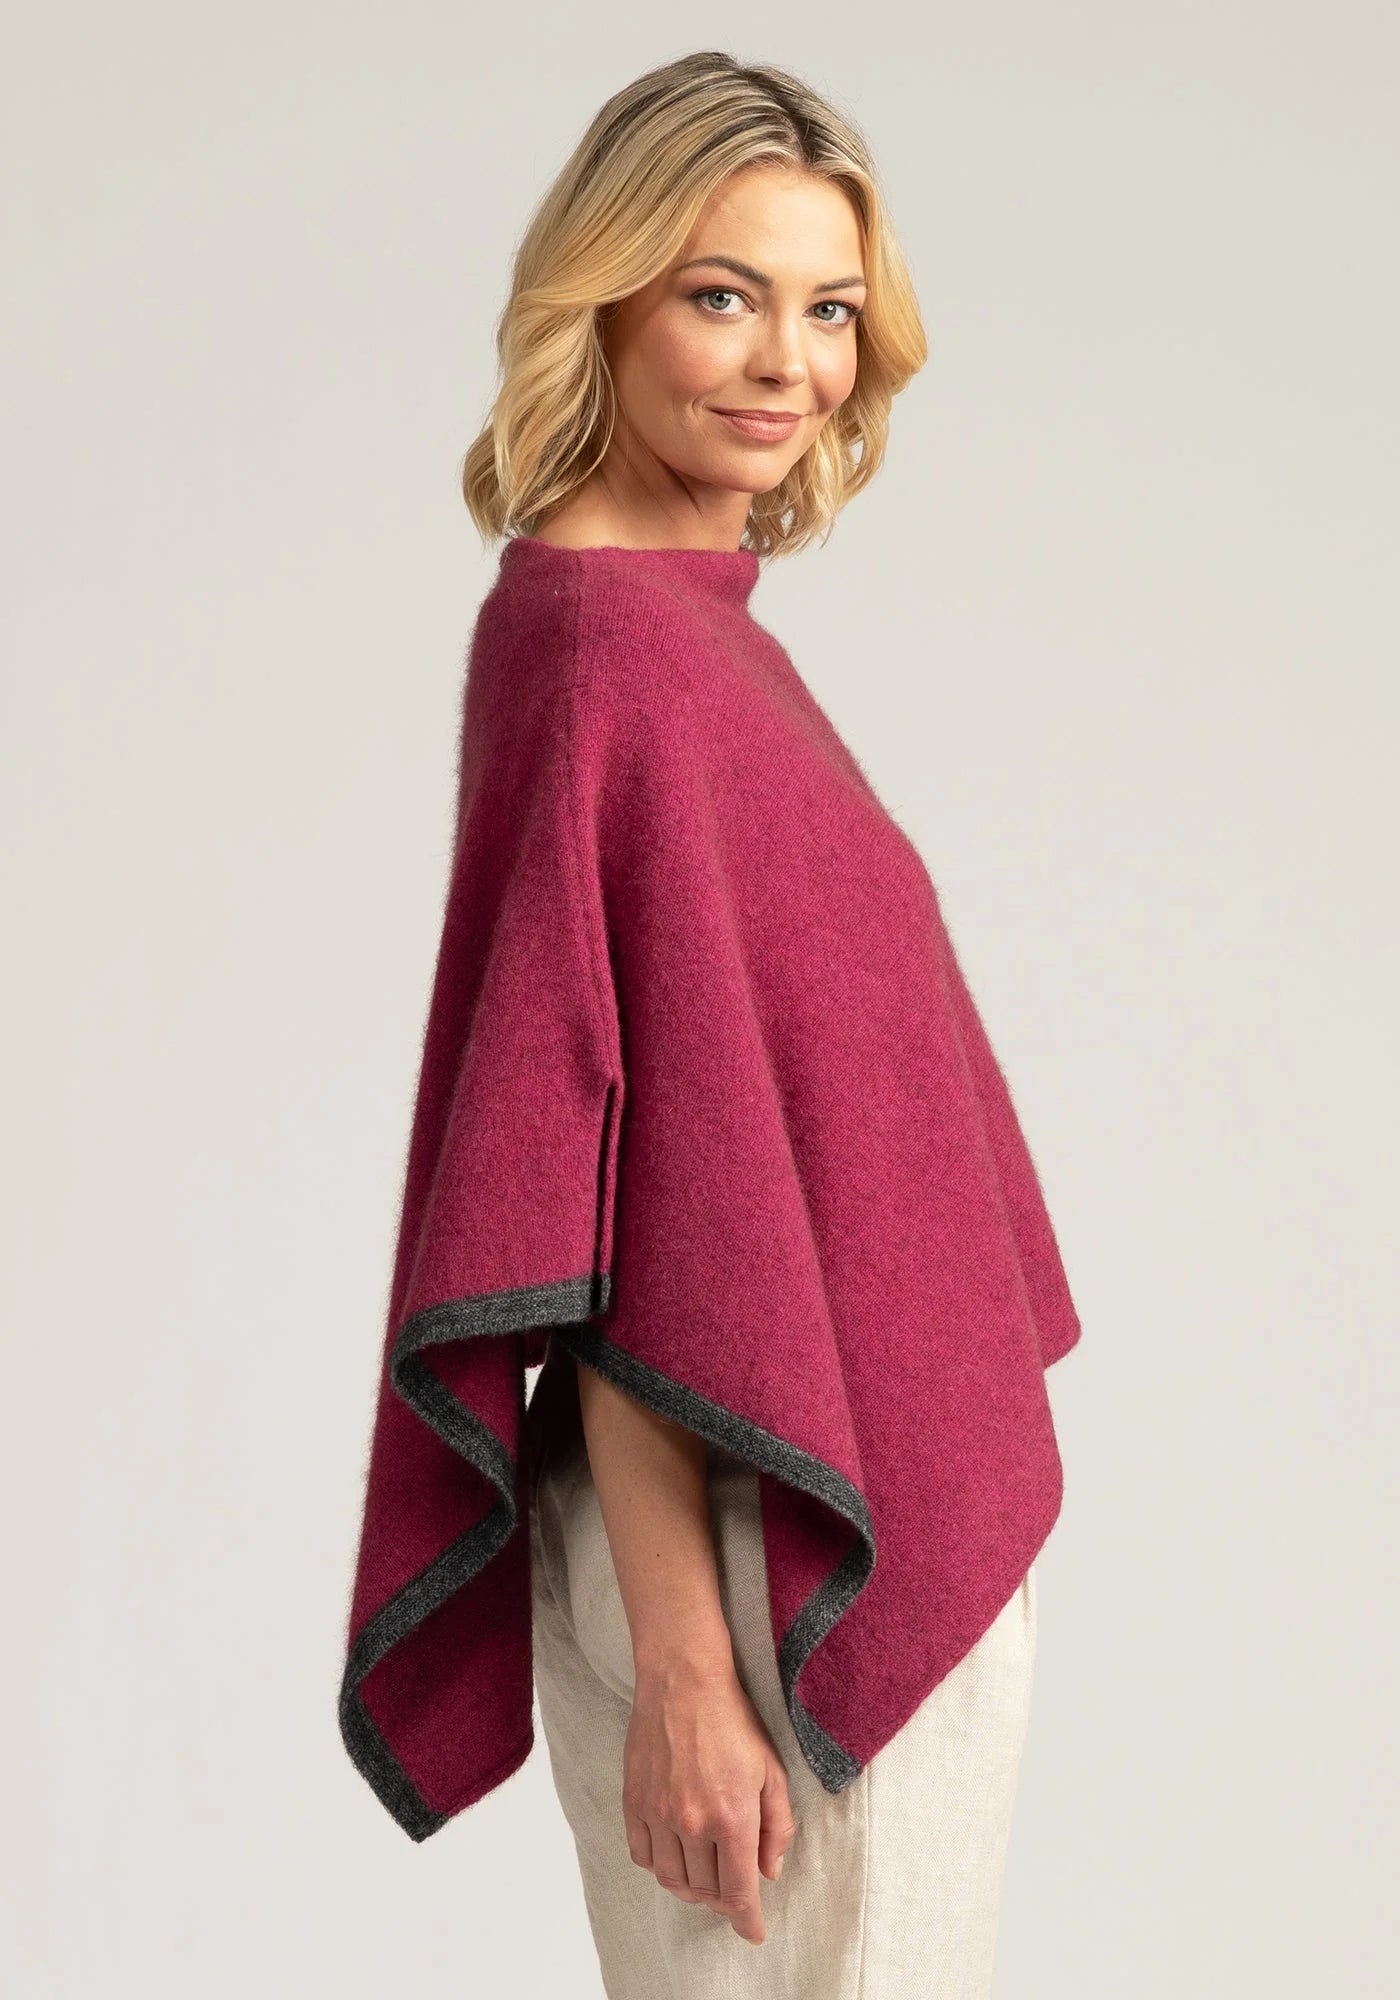 Stay warm in style with our Pink Merino Wool Poncho. Versatile, comfortable, and irresistibly elegant.